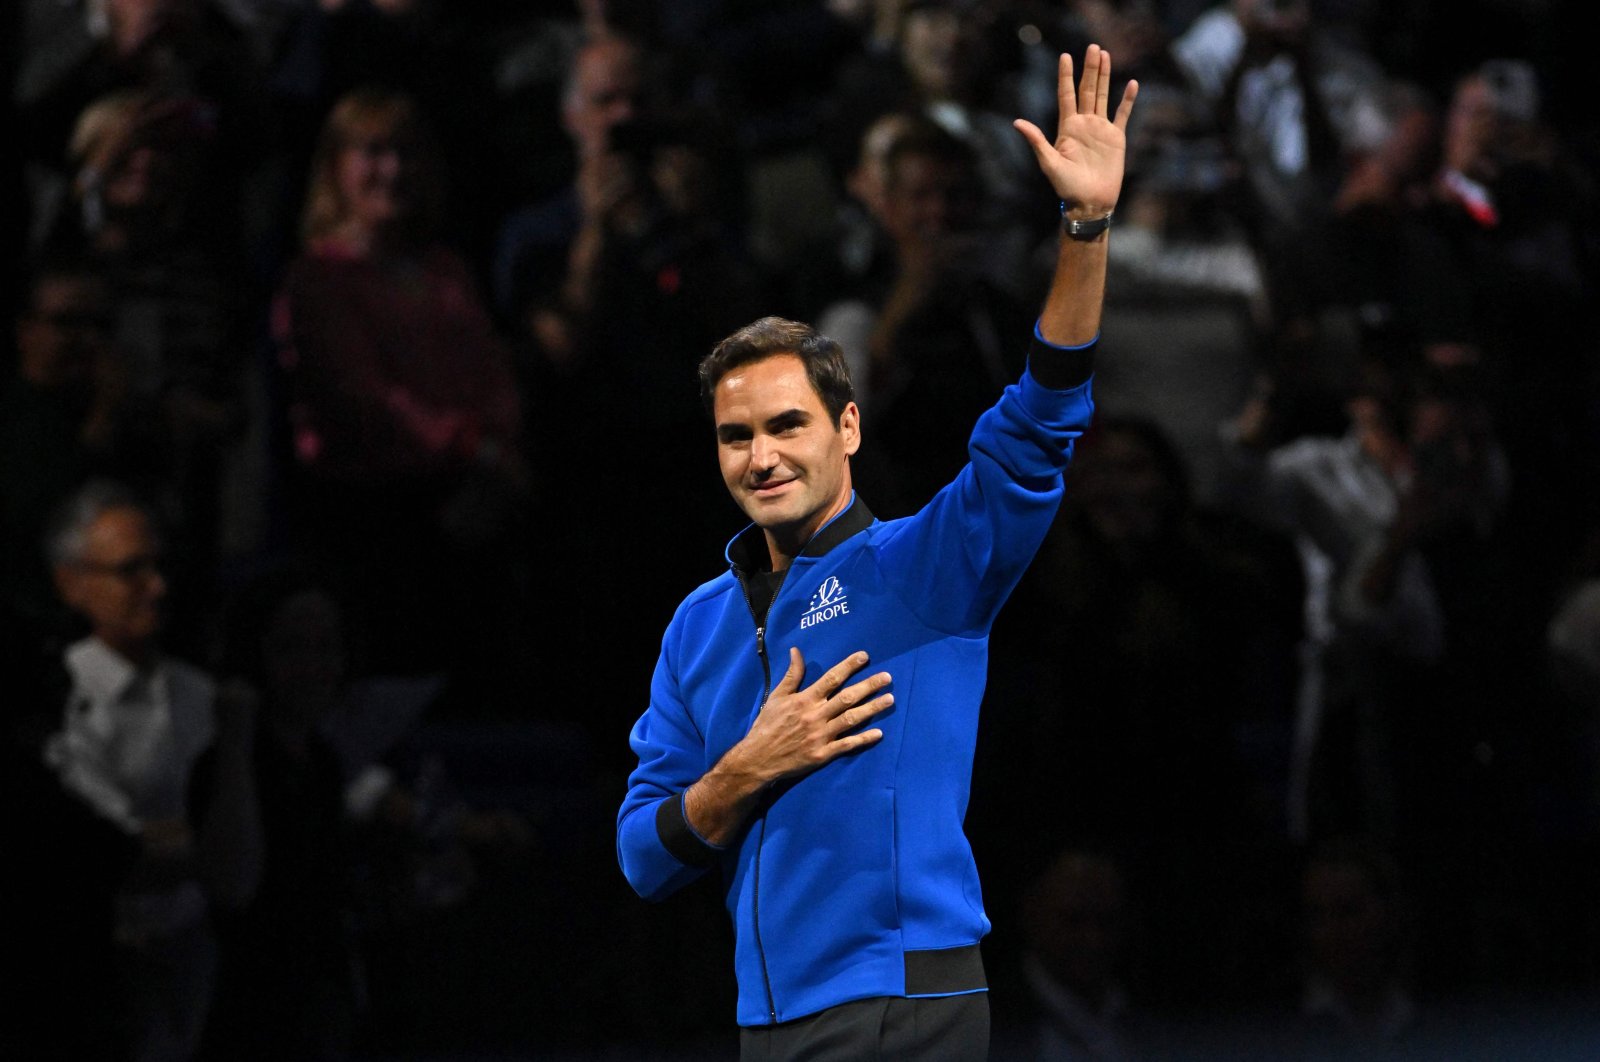 Federer hails 'amazing journey' as he bows out with defeat